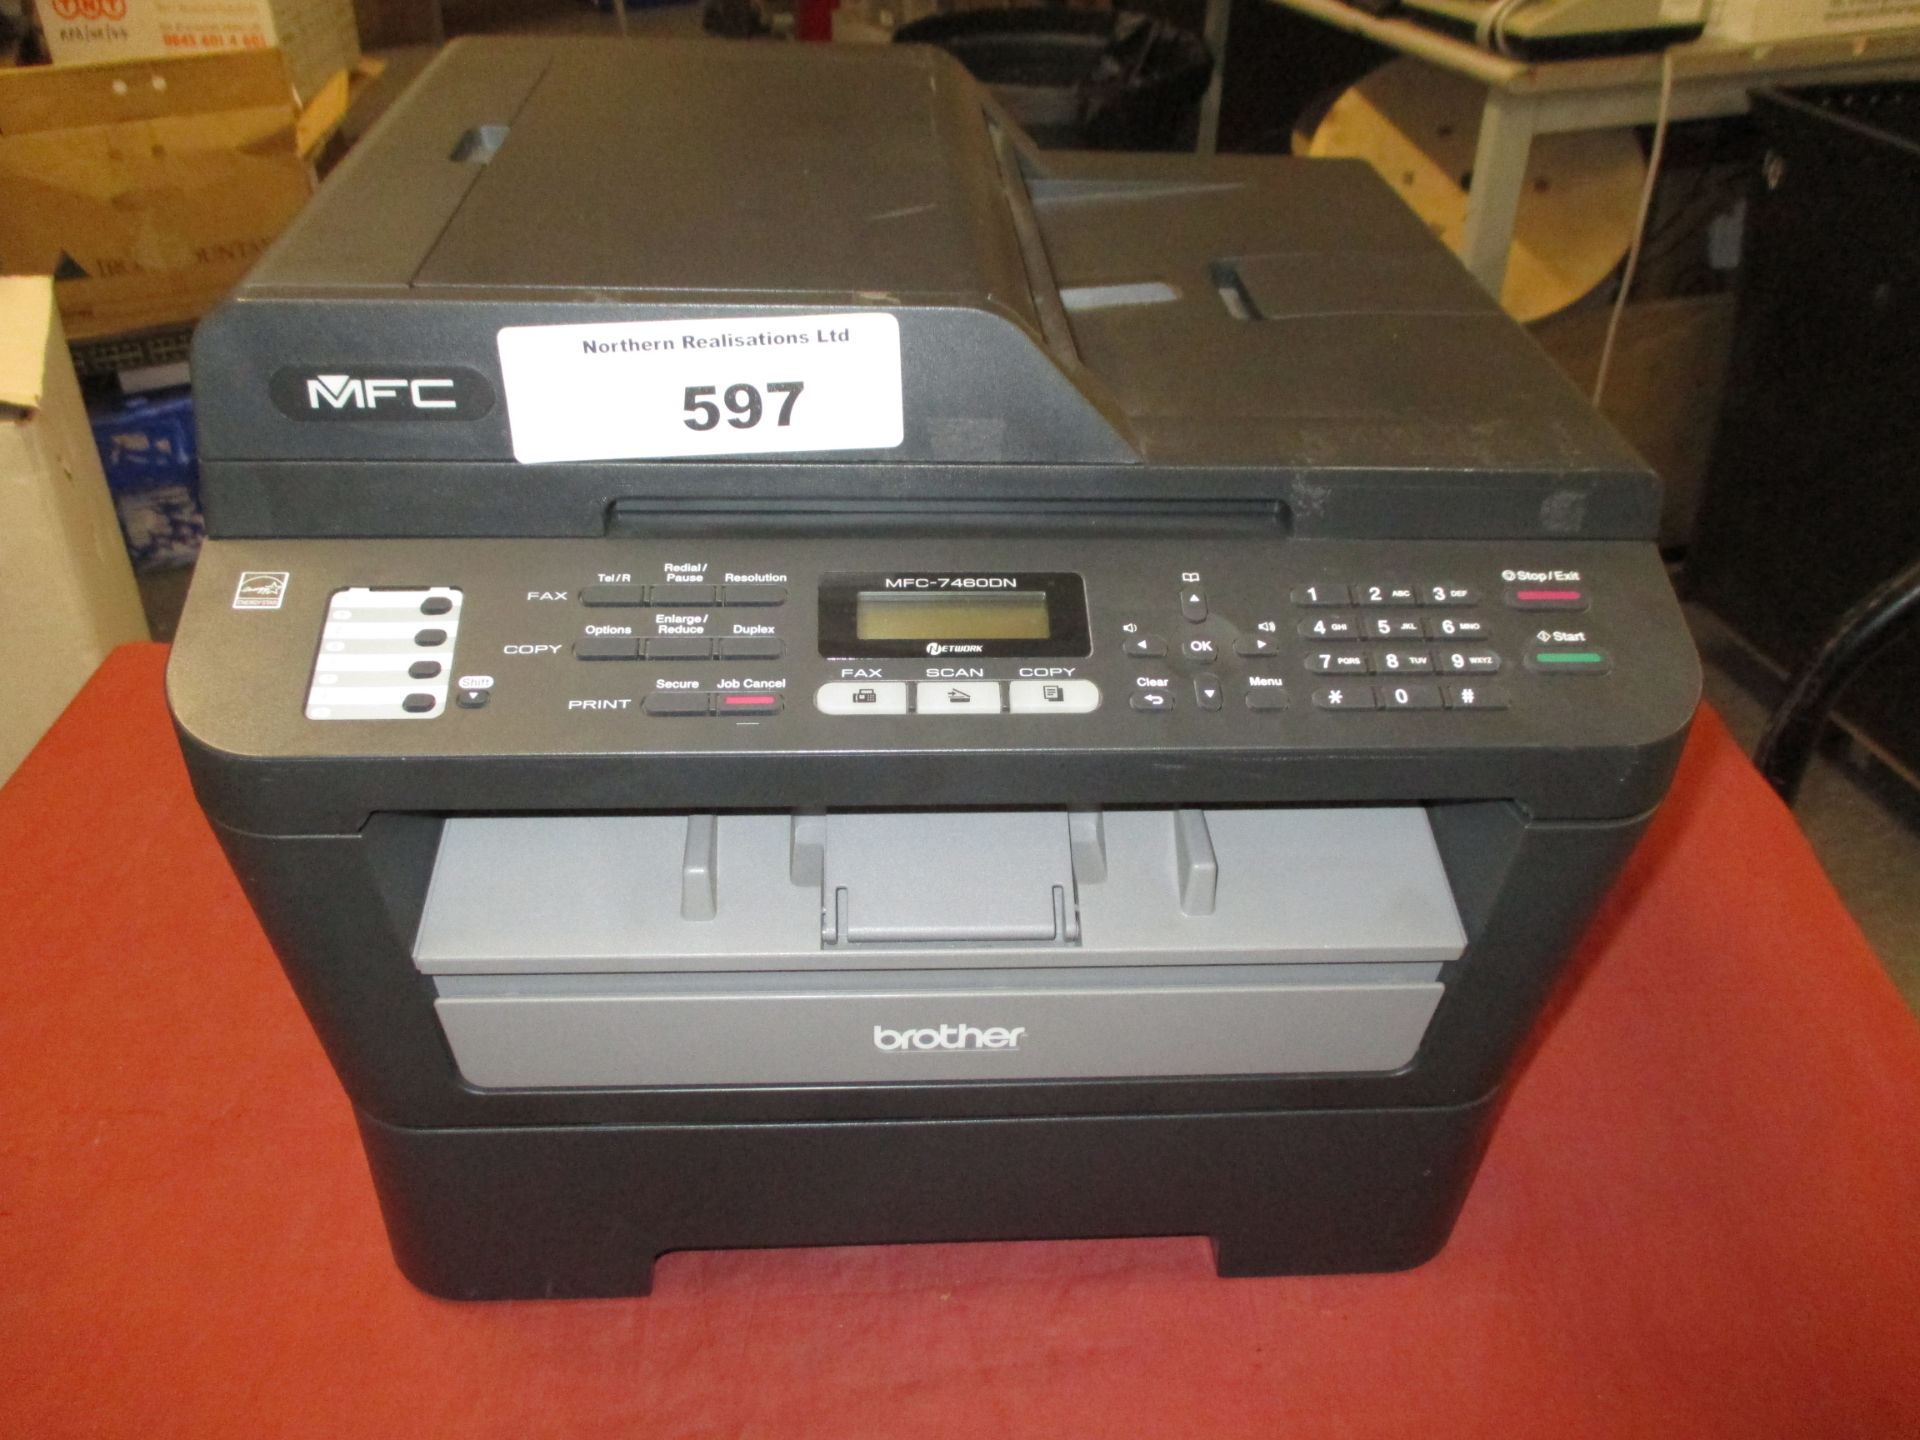 BROTHER MFC-7460DN ALL IN ONE LASER PRINTER, COPIER, SCANNER, FAX. WITH TEST PRINT